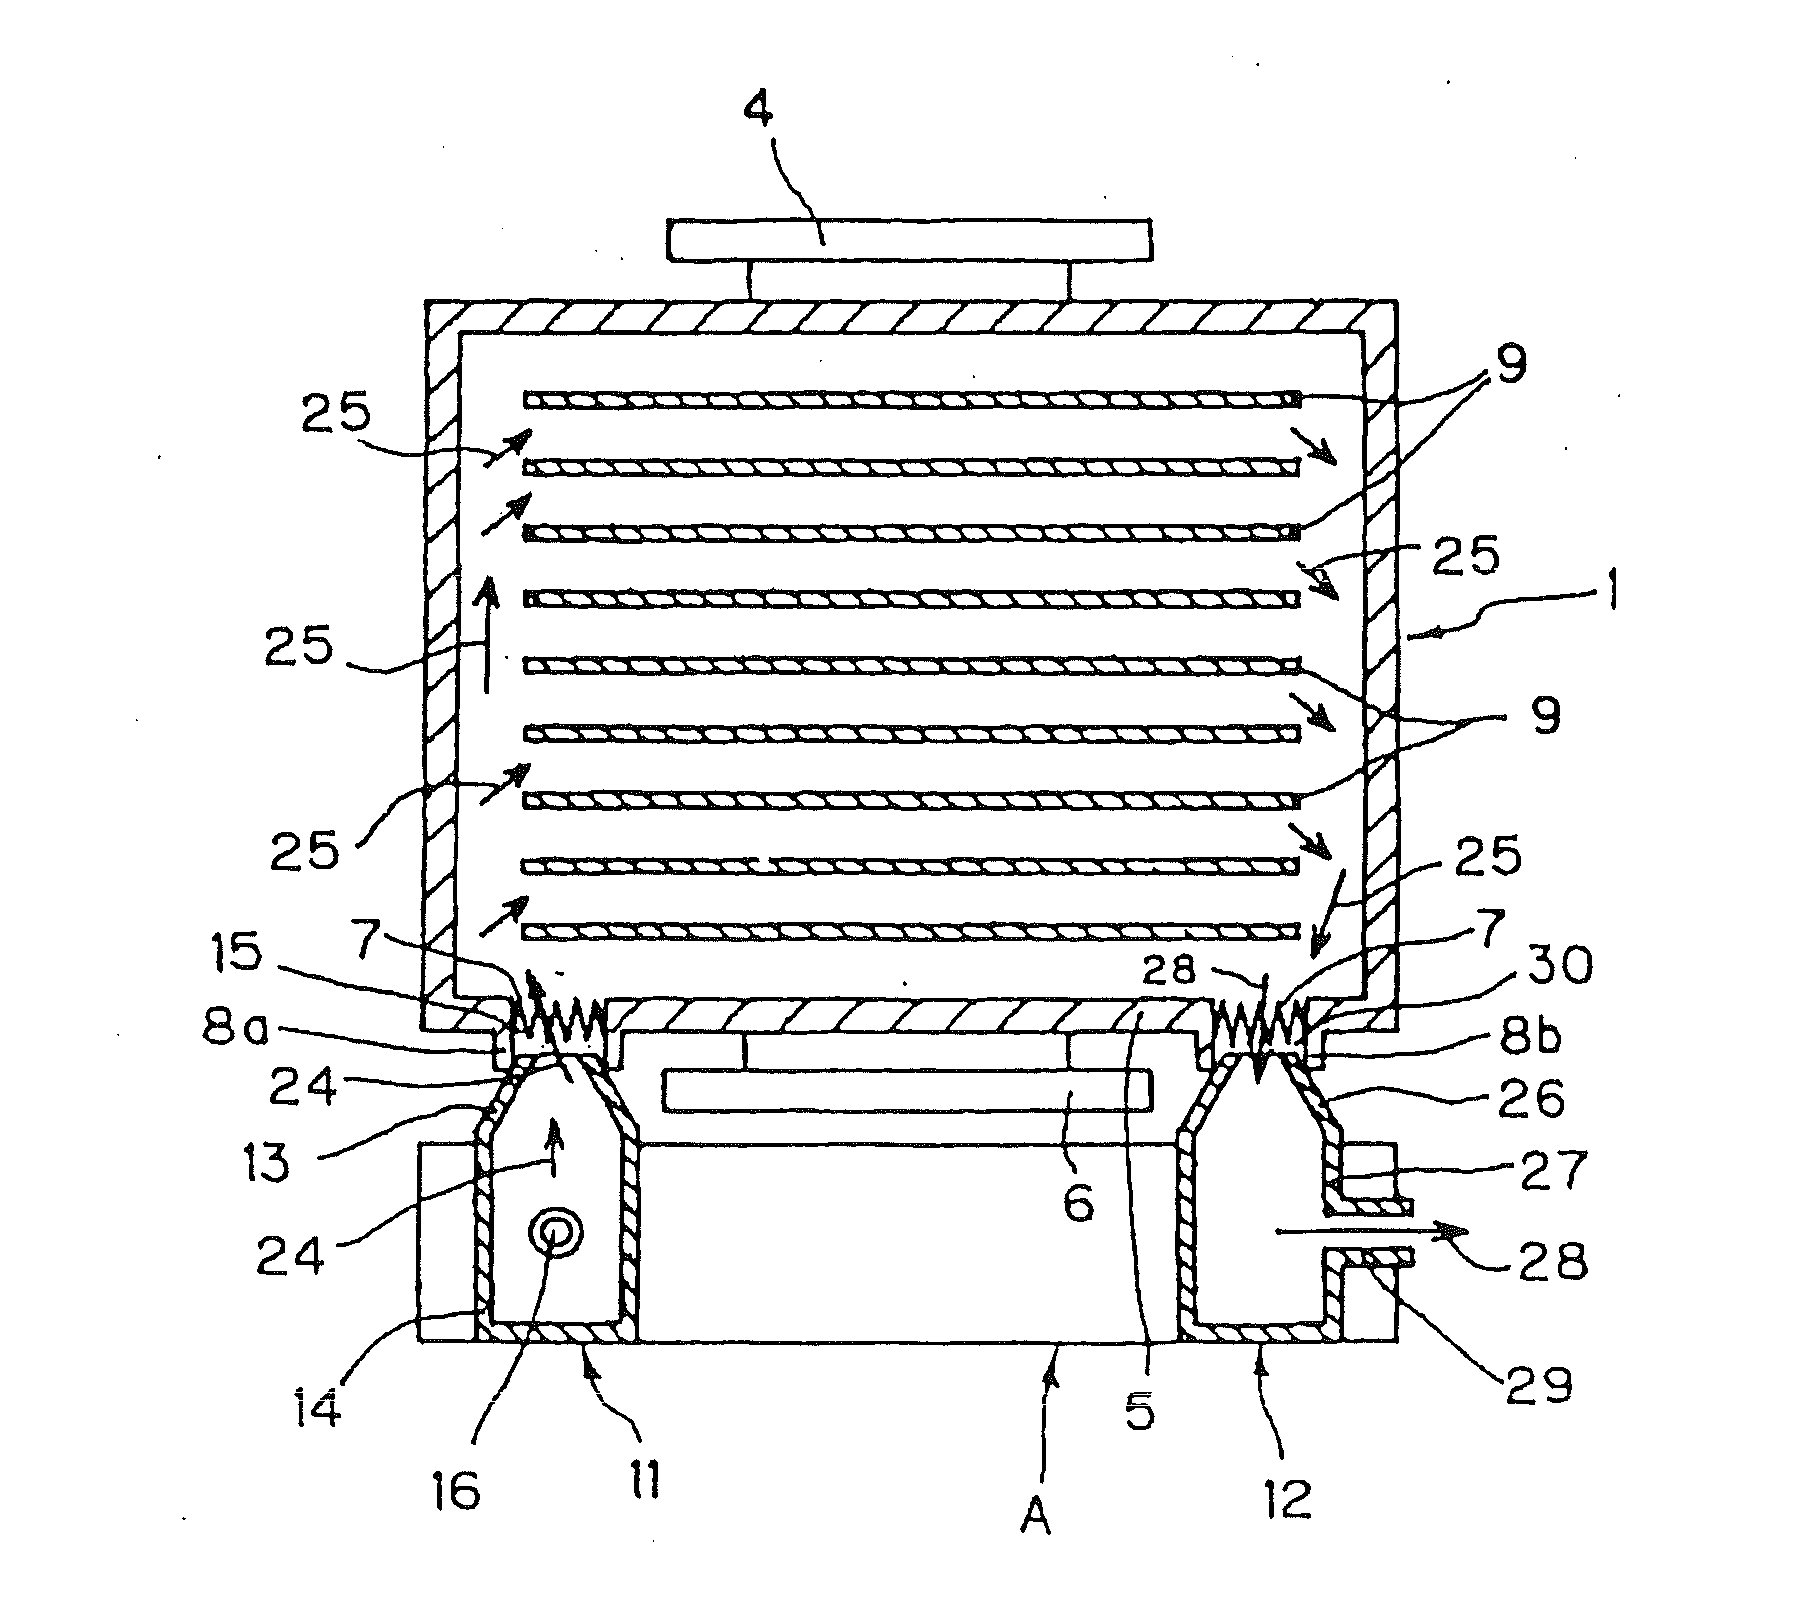 Apparatus for Charging Dry Air or Nitrogen Gas into a Container for Storing Semiconductor Wafers and an Apparatus for Thereby Removing Static Electricity from the Wafers